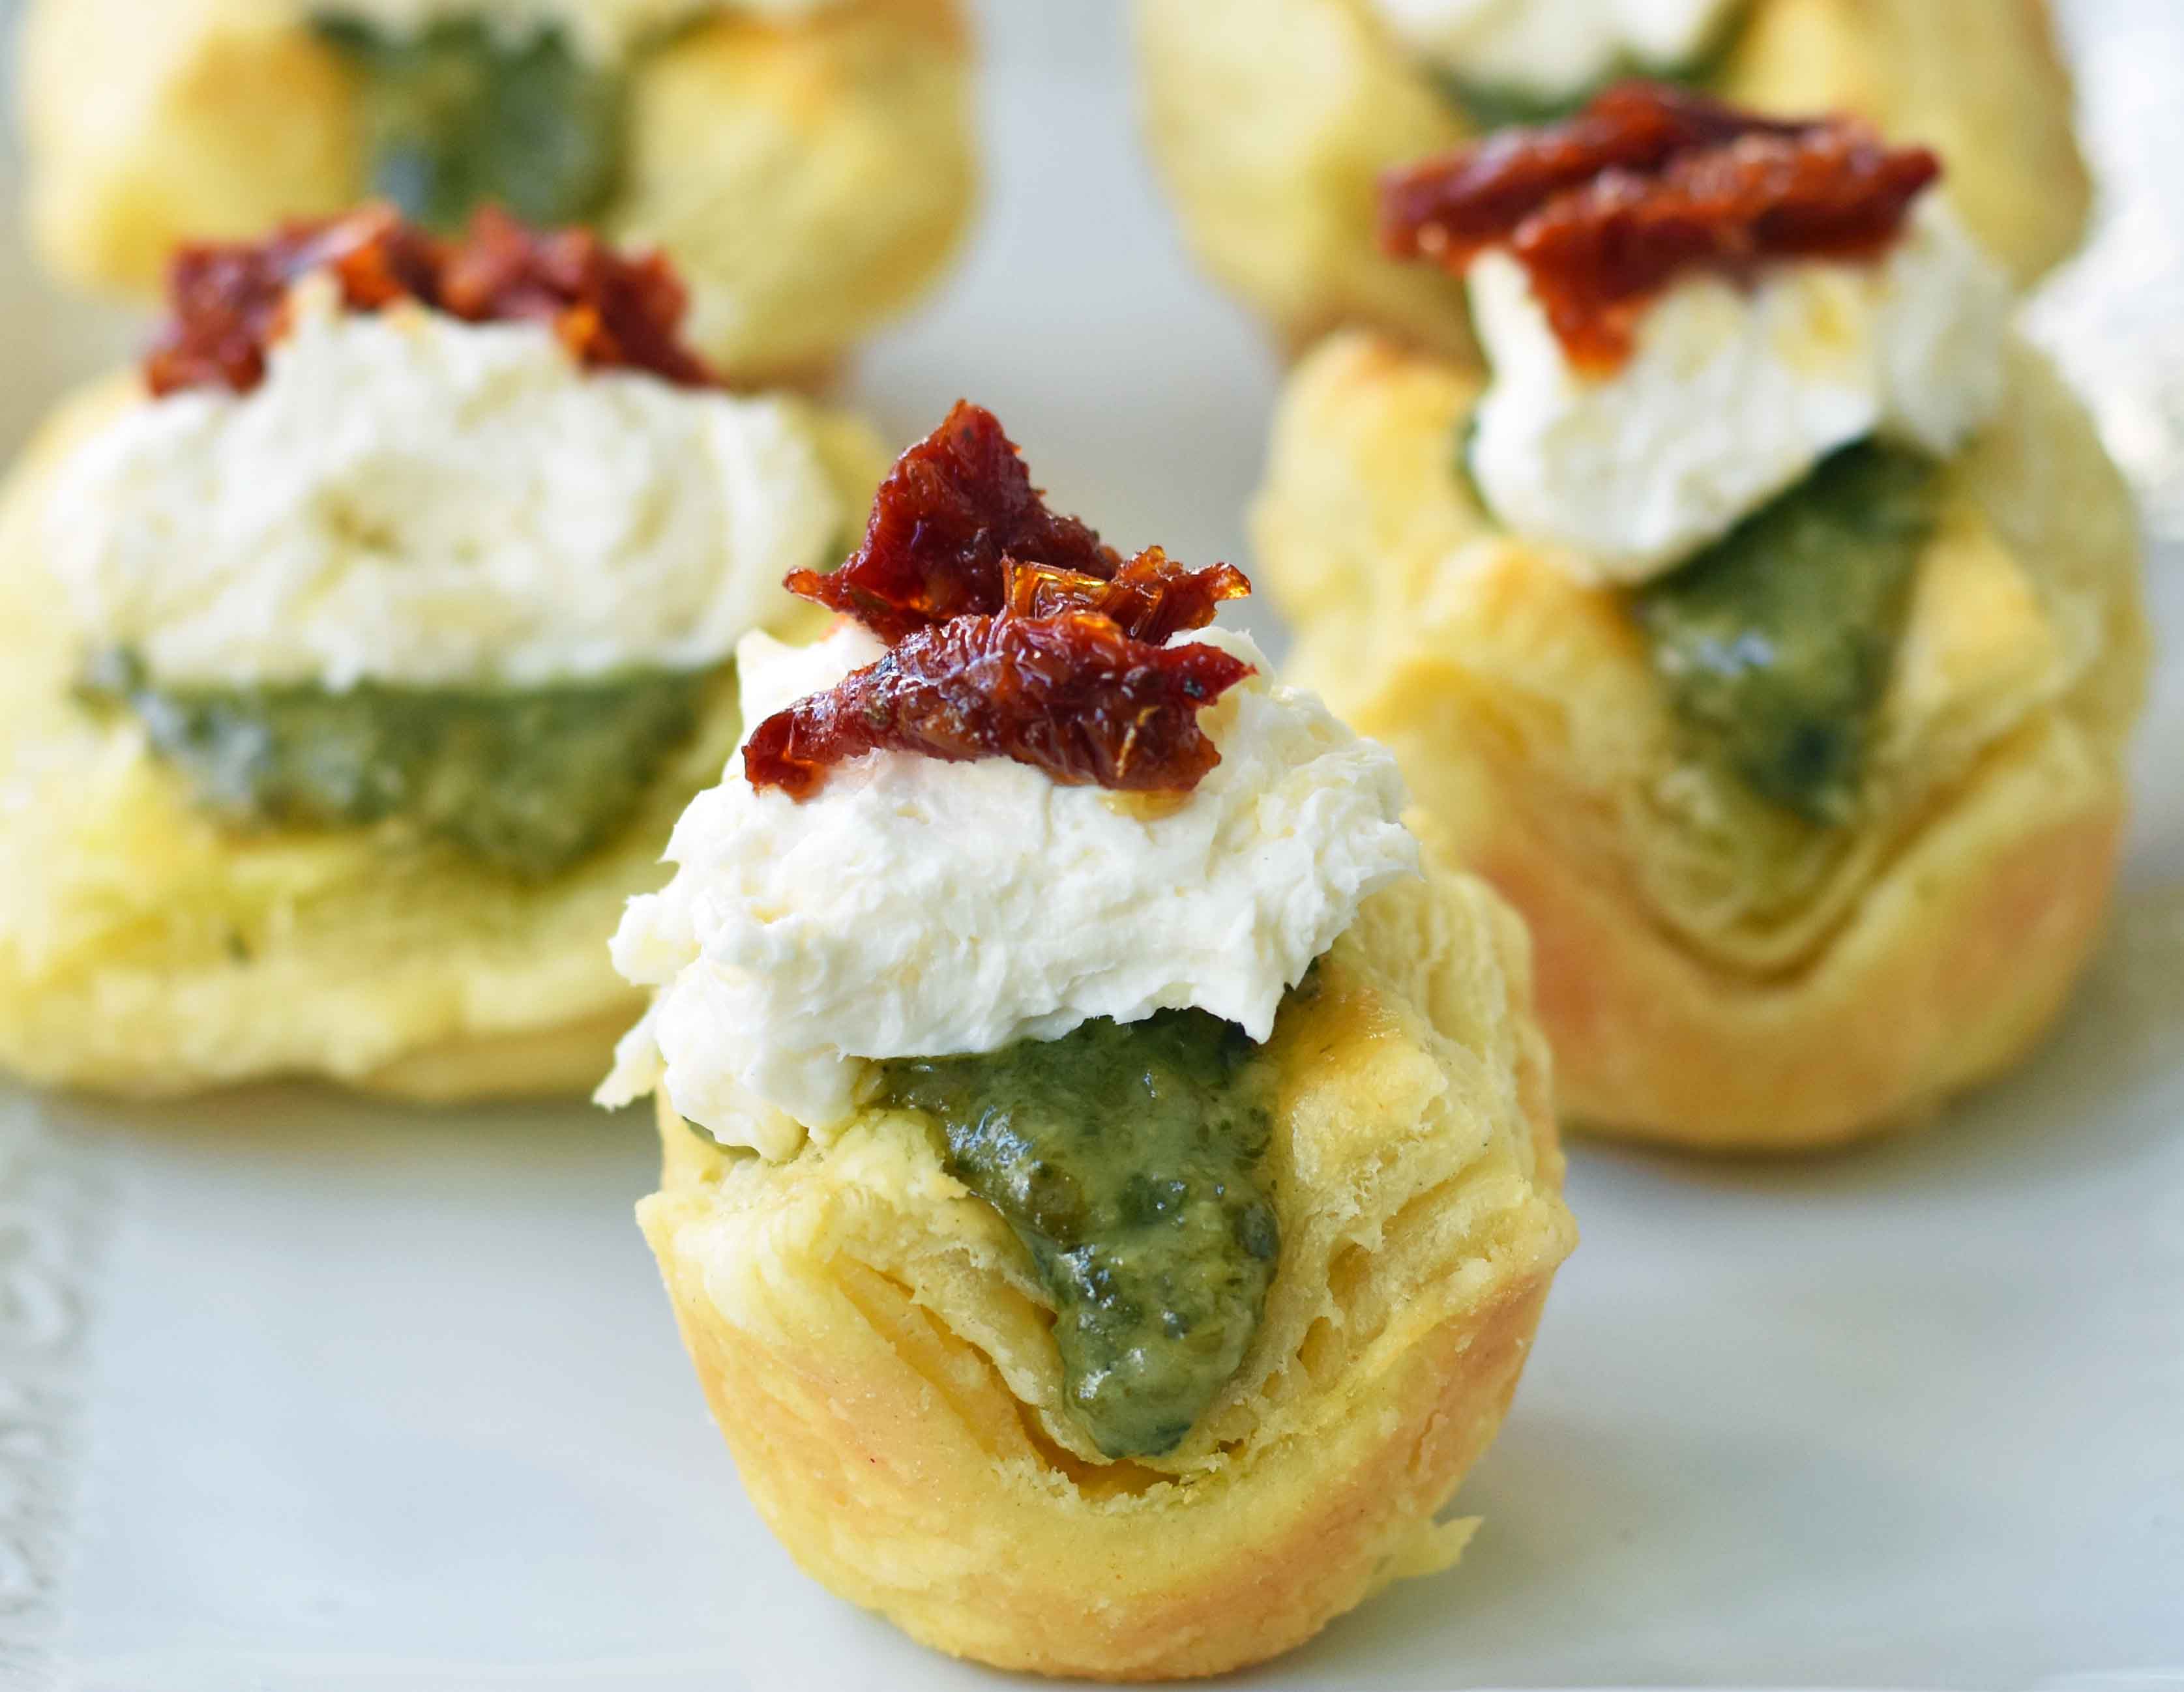 Pesto Parmesan Sundried Tomato Tartlets are made with flaky puff pastry baked until golden brown and filled with Buitoni freshly made pesto sauce, a parmesan goat cheese cream cheese layer, and topped with sweet sundried tomatoes. A beautiful and festive holiday appetizer. www.modernhoney.com @buitoniusa #sponsored